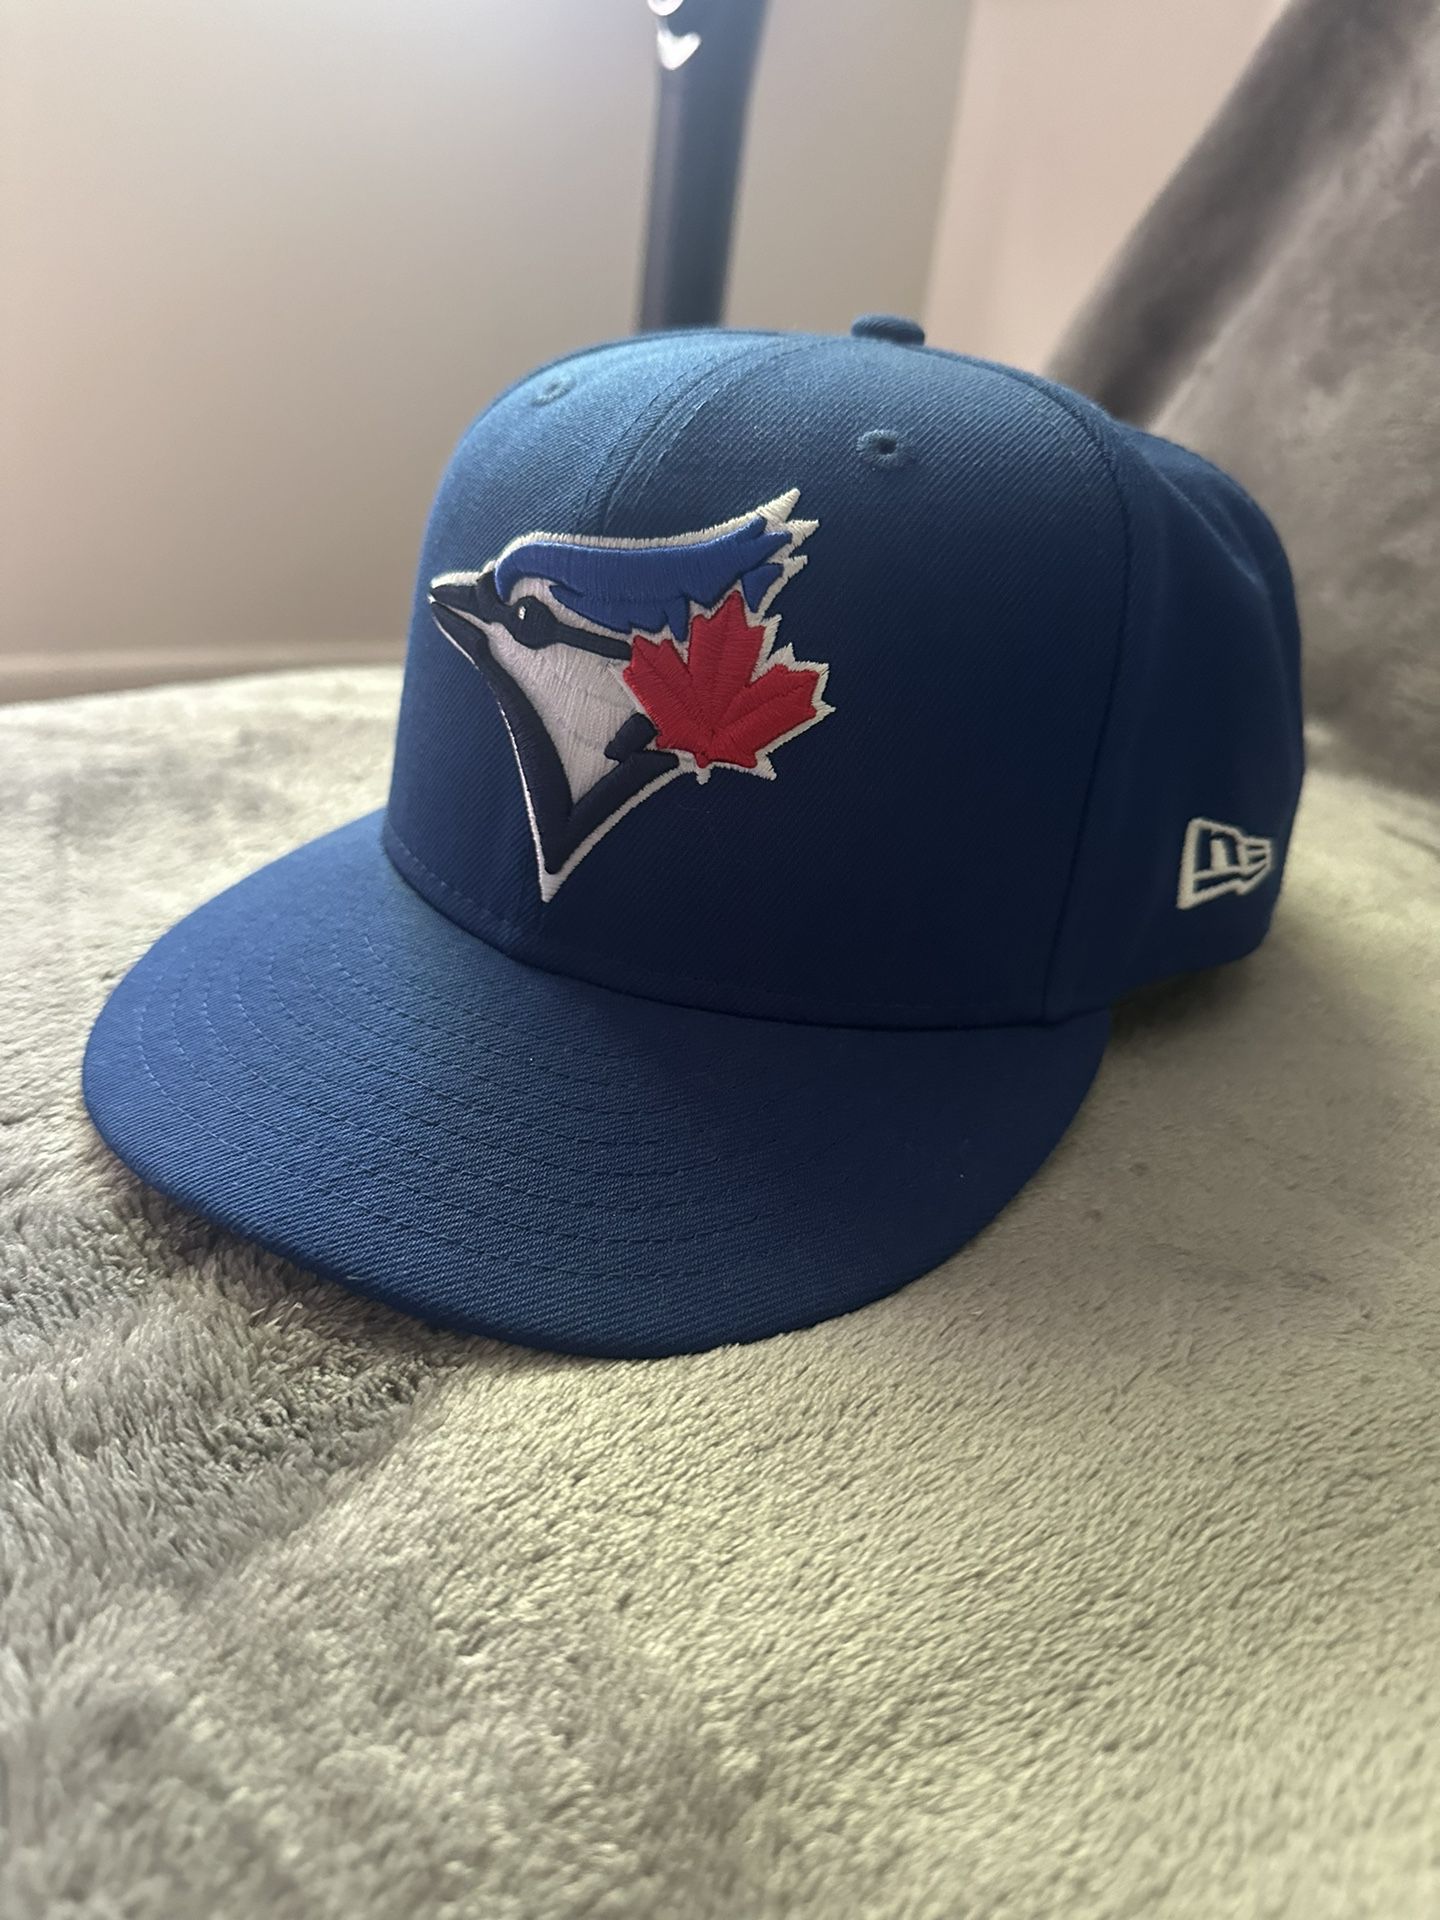 Blue jays New Era Fitted Hat 7 1/4